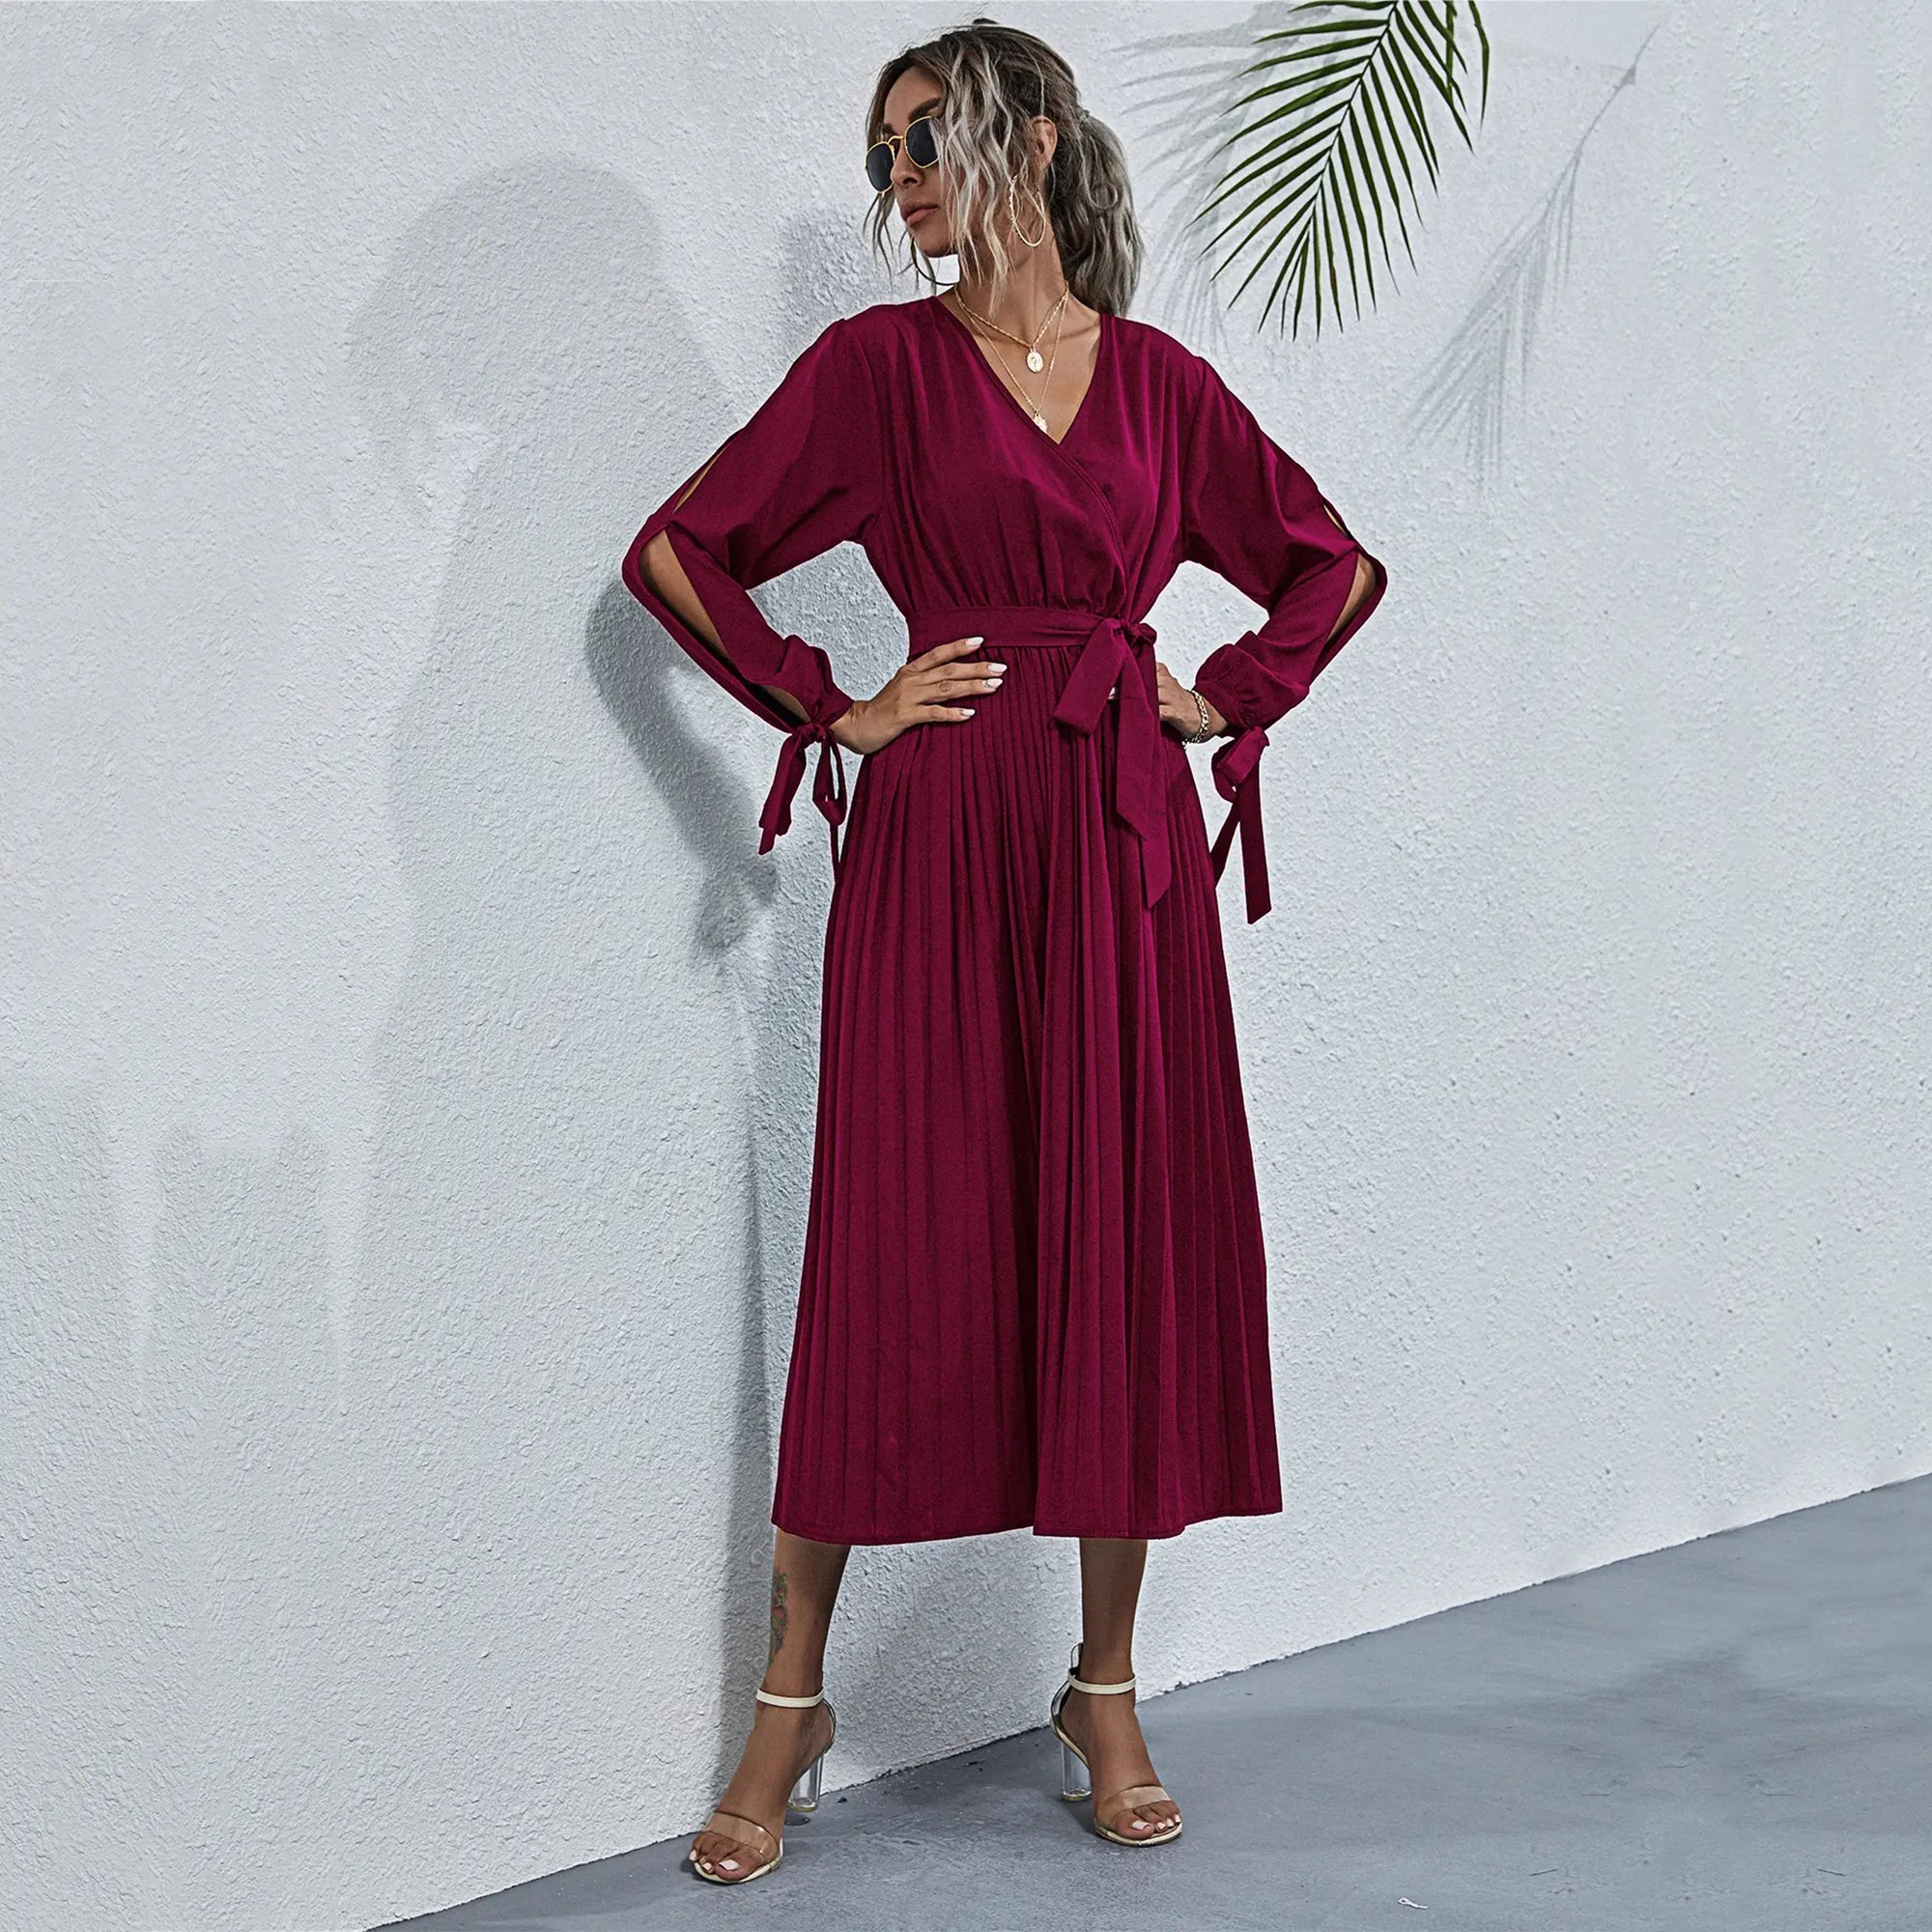 2021 cross-border fashion formal wear casual plus size solid color long-sleeved V-neck hollow pleated women dress